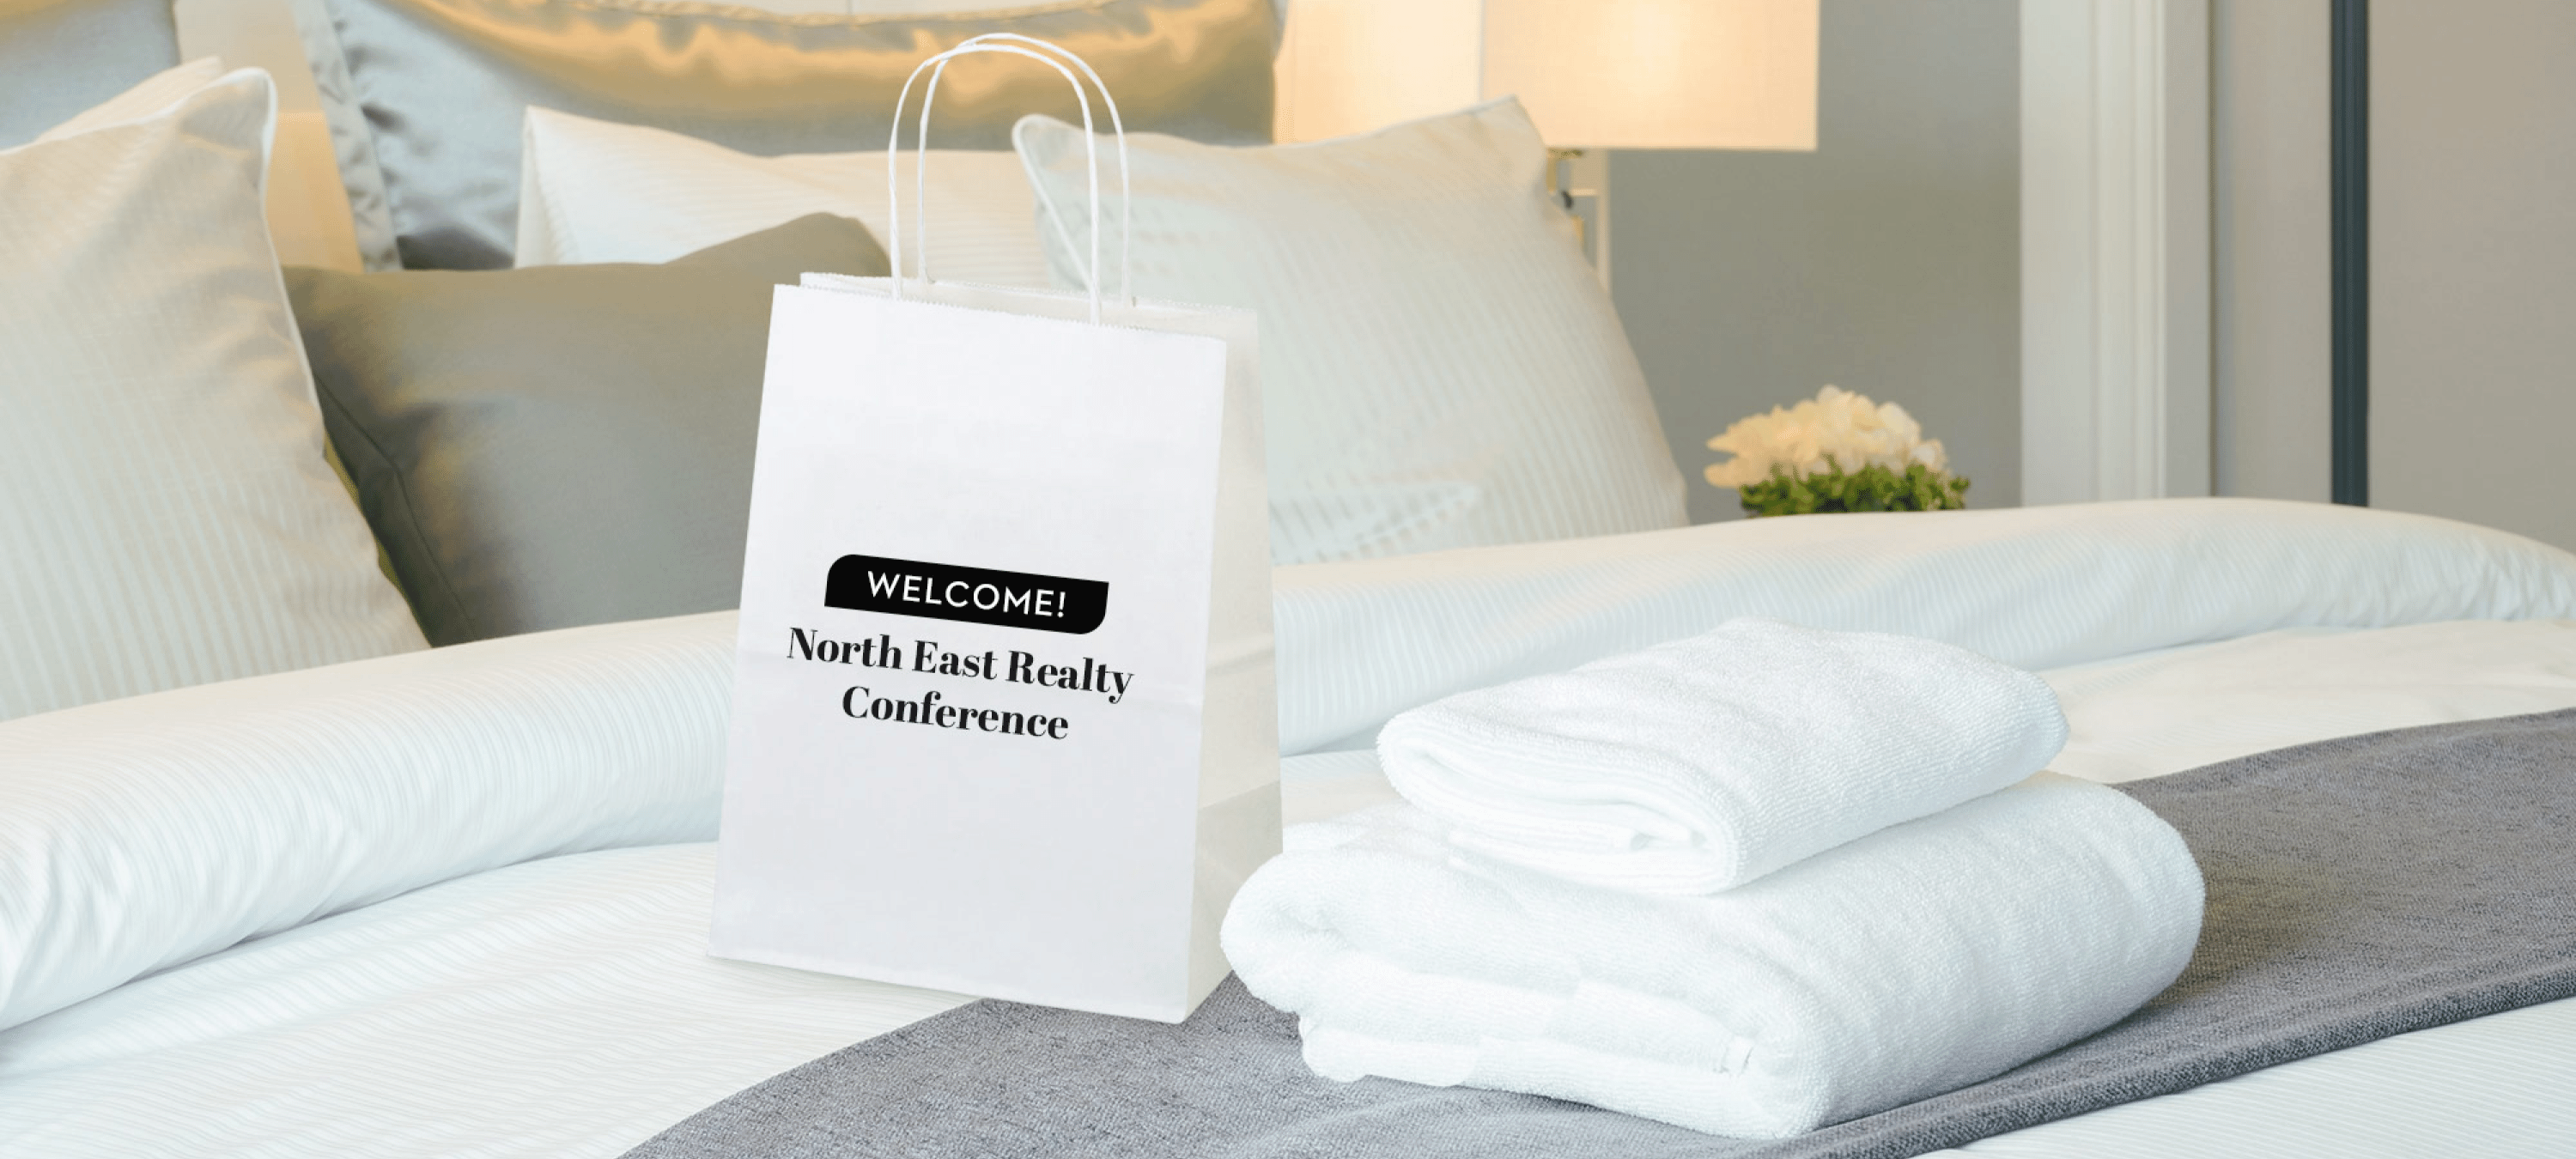 17 Corporate Room Drop Ideas – Welcome Gifts for Conferences & Events